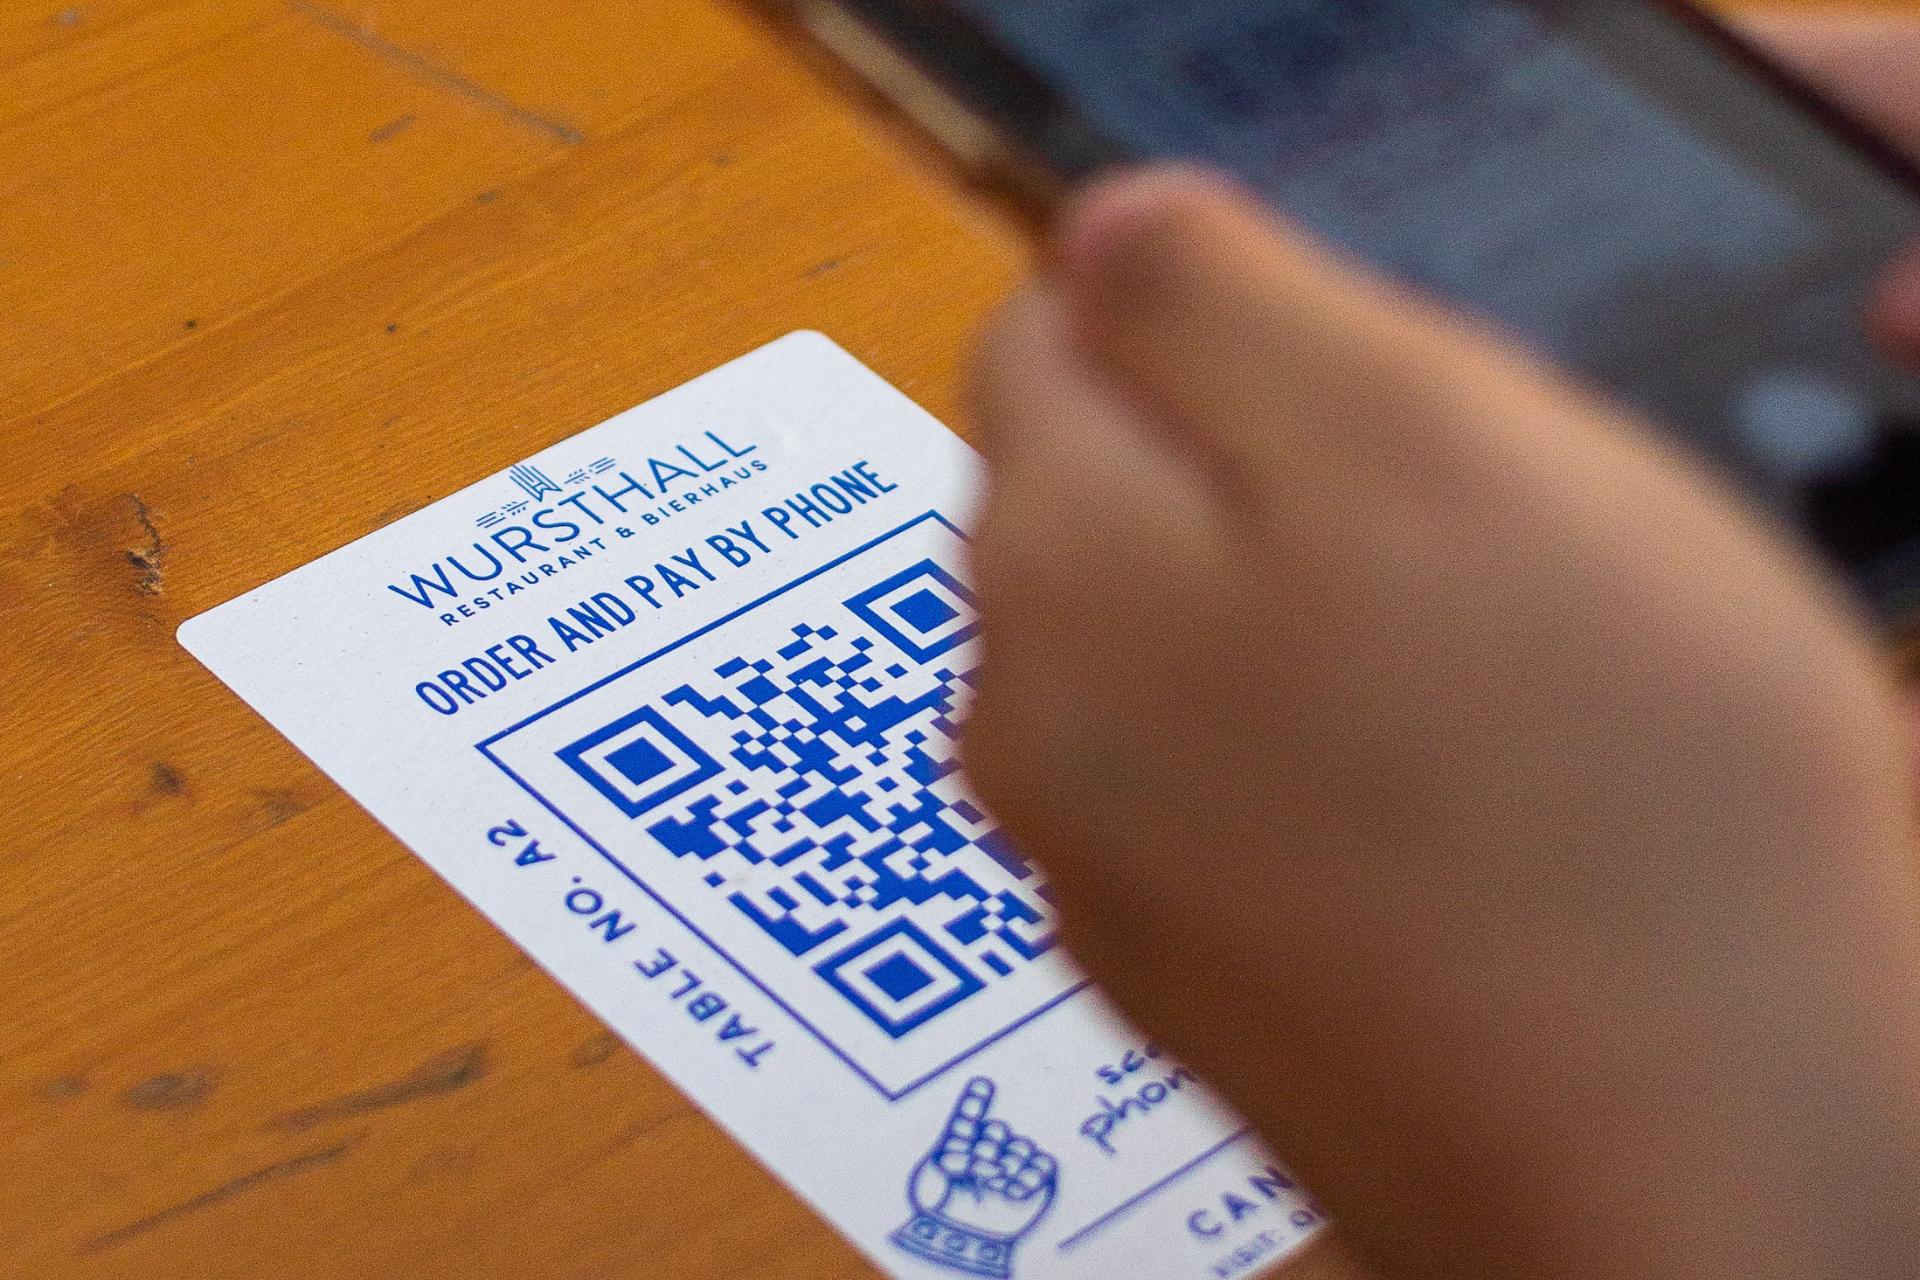 QR code menu sign to order and pay from the table in a restaurant